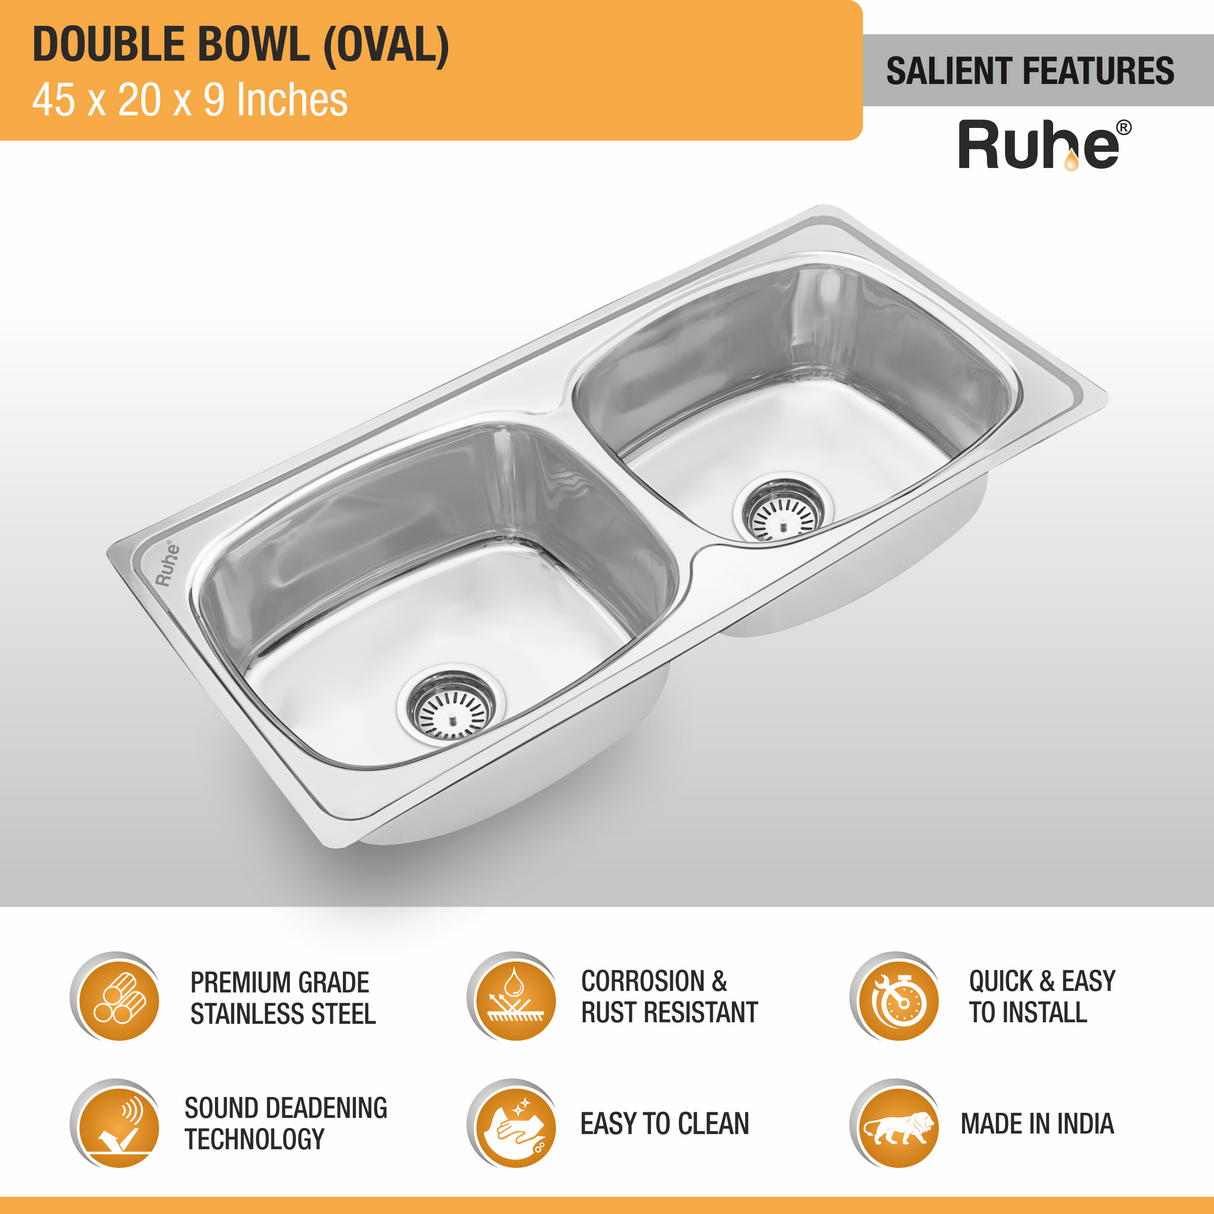 Oval Double Bowl Premium Stainless Steel (45 x 20 x 9 inches) Kitchen Sink features and benefits